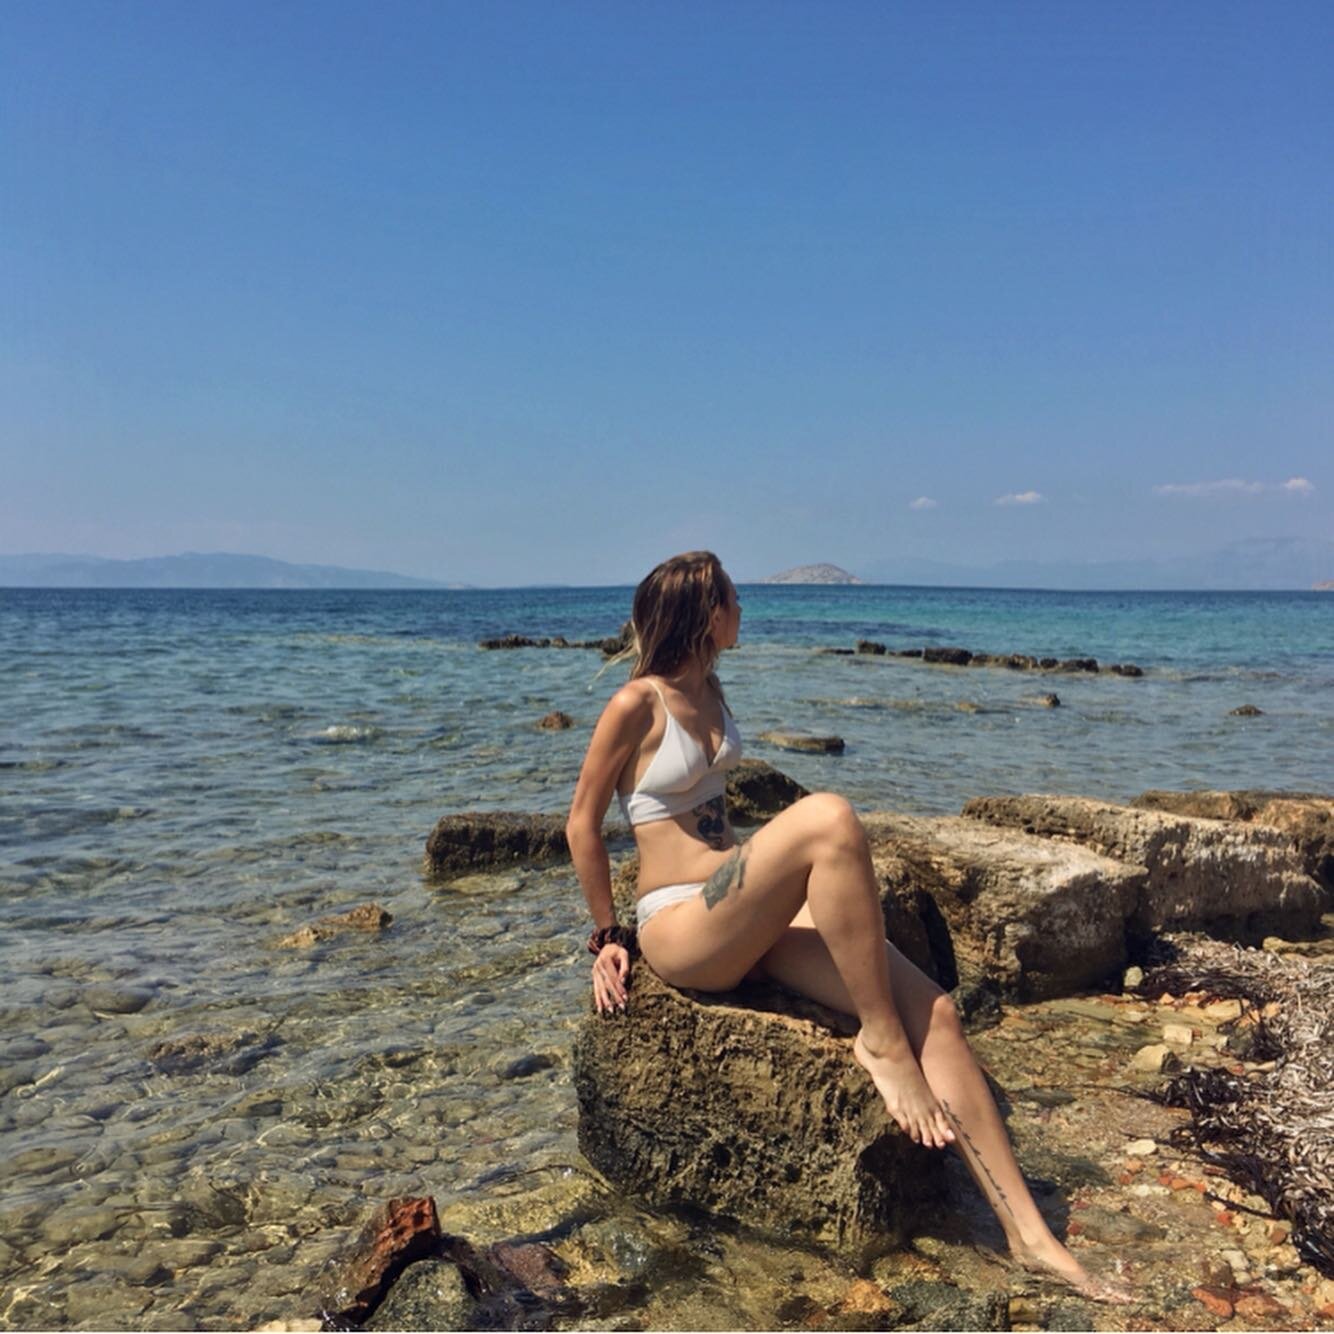 Forever destined to crop my face out of pictures. Not cause I&rsquo;m gross or anything just cause I&rsquo;m stupid.
&bull;
&bull;
&bull;
#aegina #aegean #greece #summer #beach #expatlife #lifeabroad #photooftheday #instasummer #swimming #greekisland